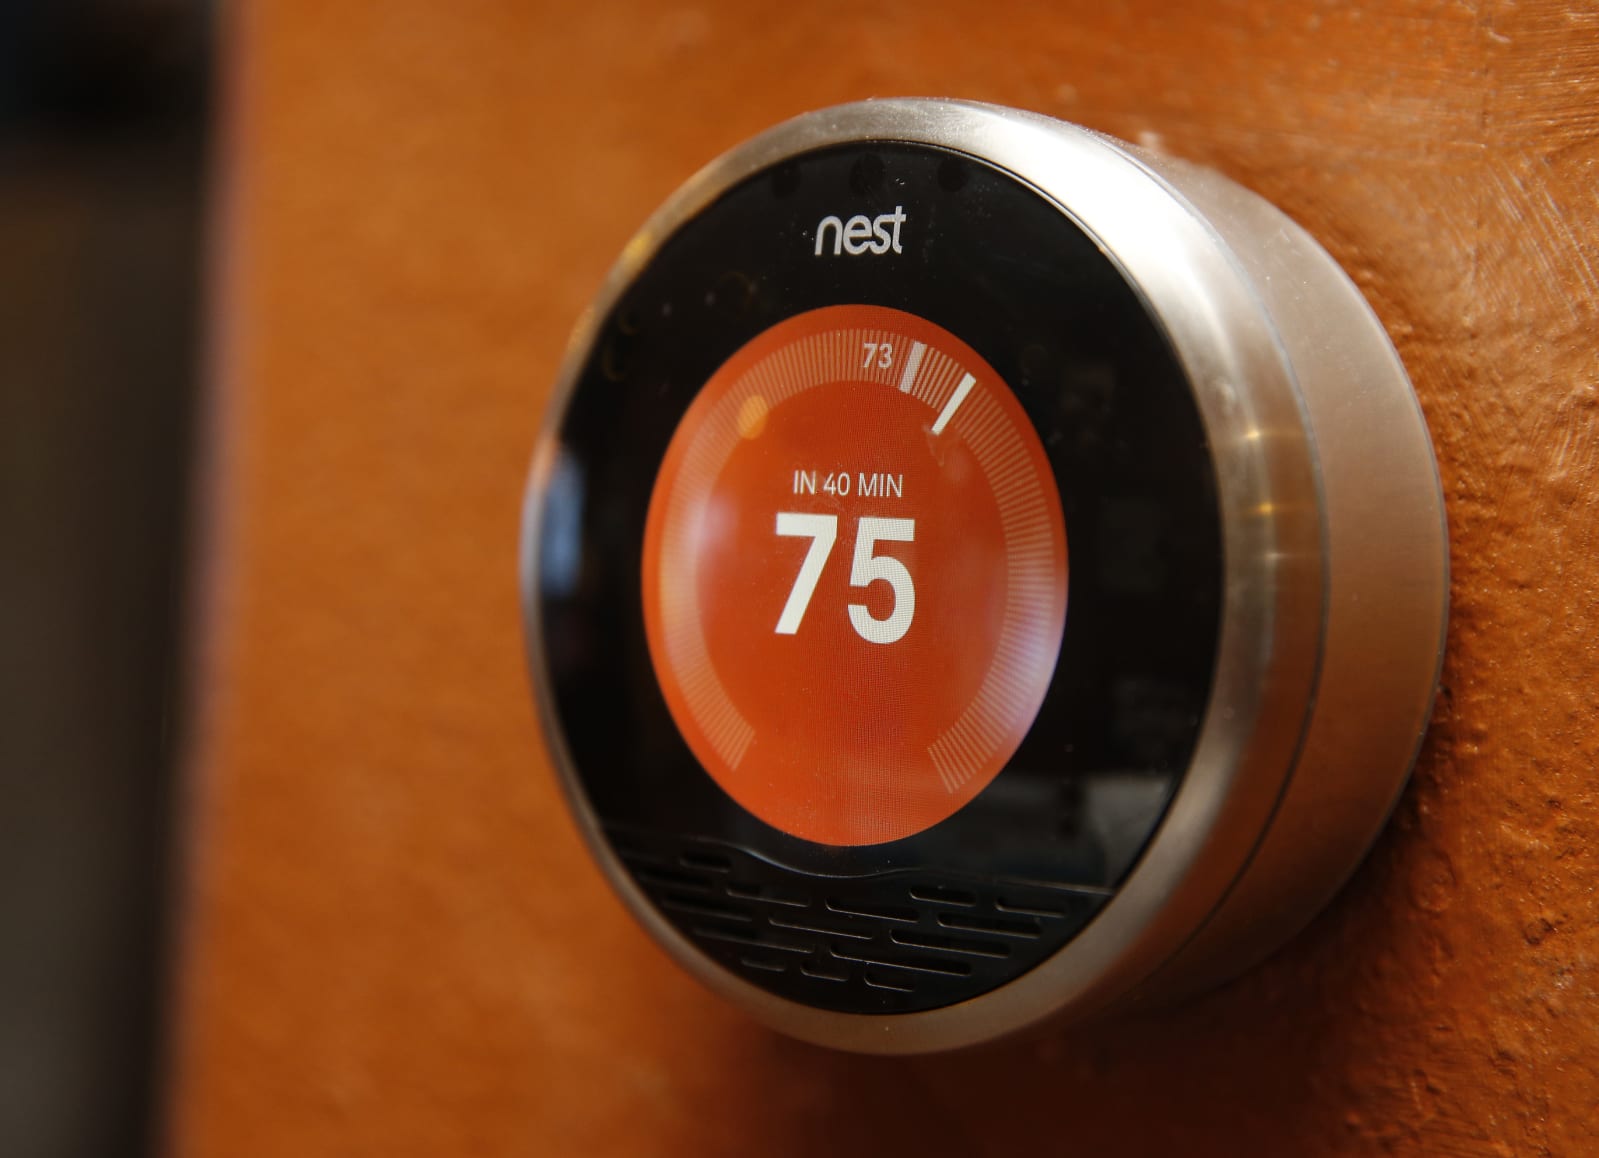 Google Nest could rule the smart home, if it can get privacy right |  Engadget